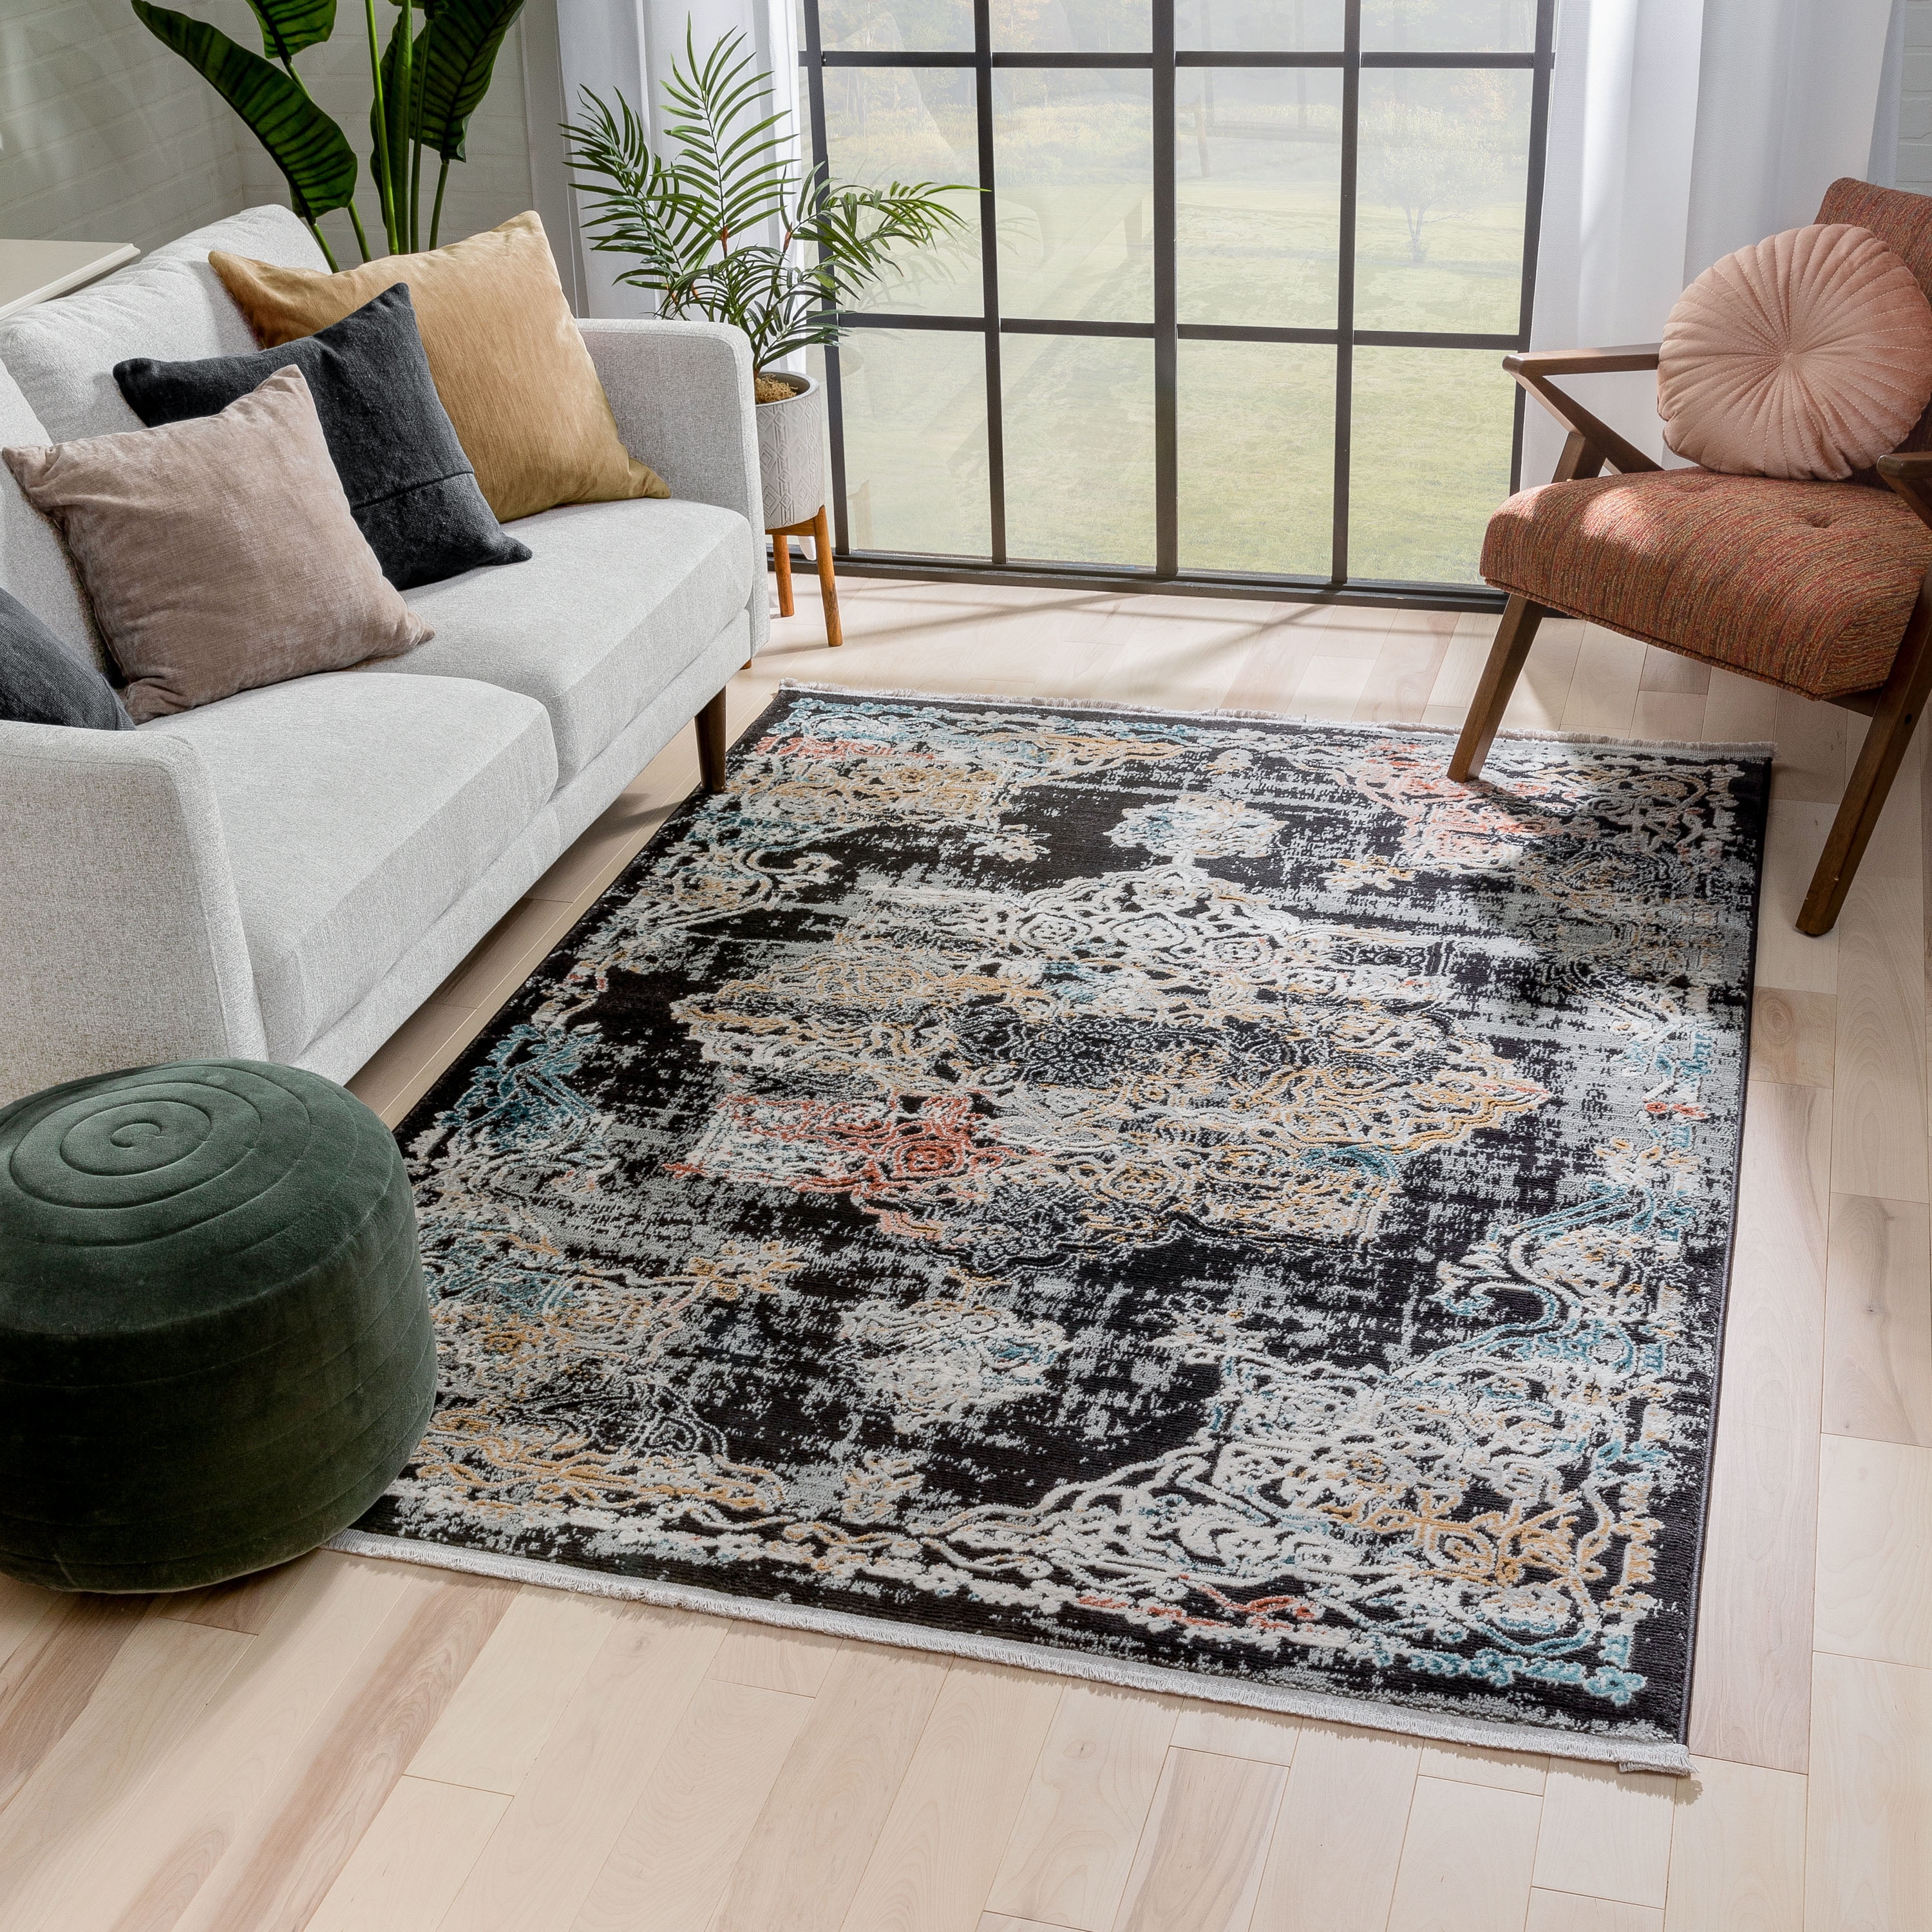 Traditional Rugs for Living Room Medallion Rugs Distressed Look Trending Now NEW 